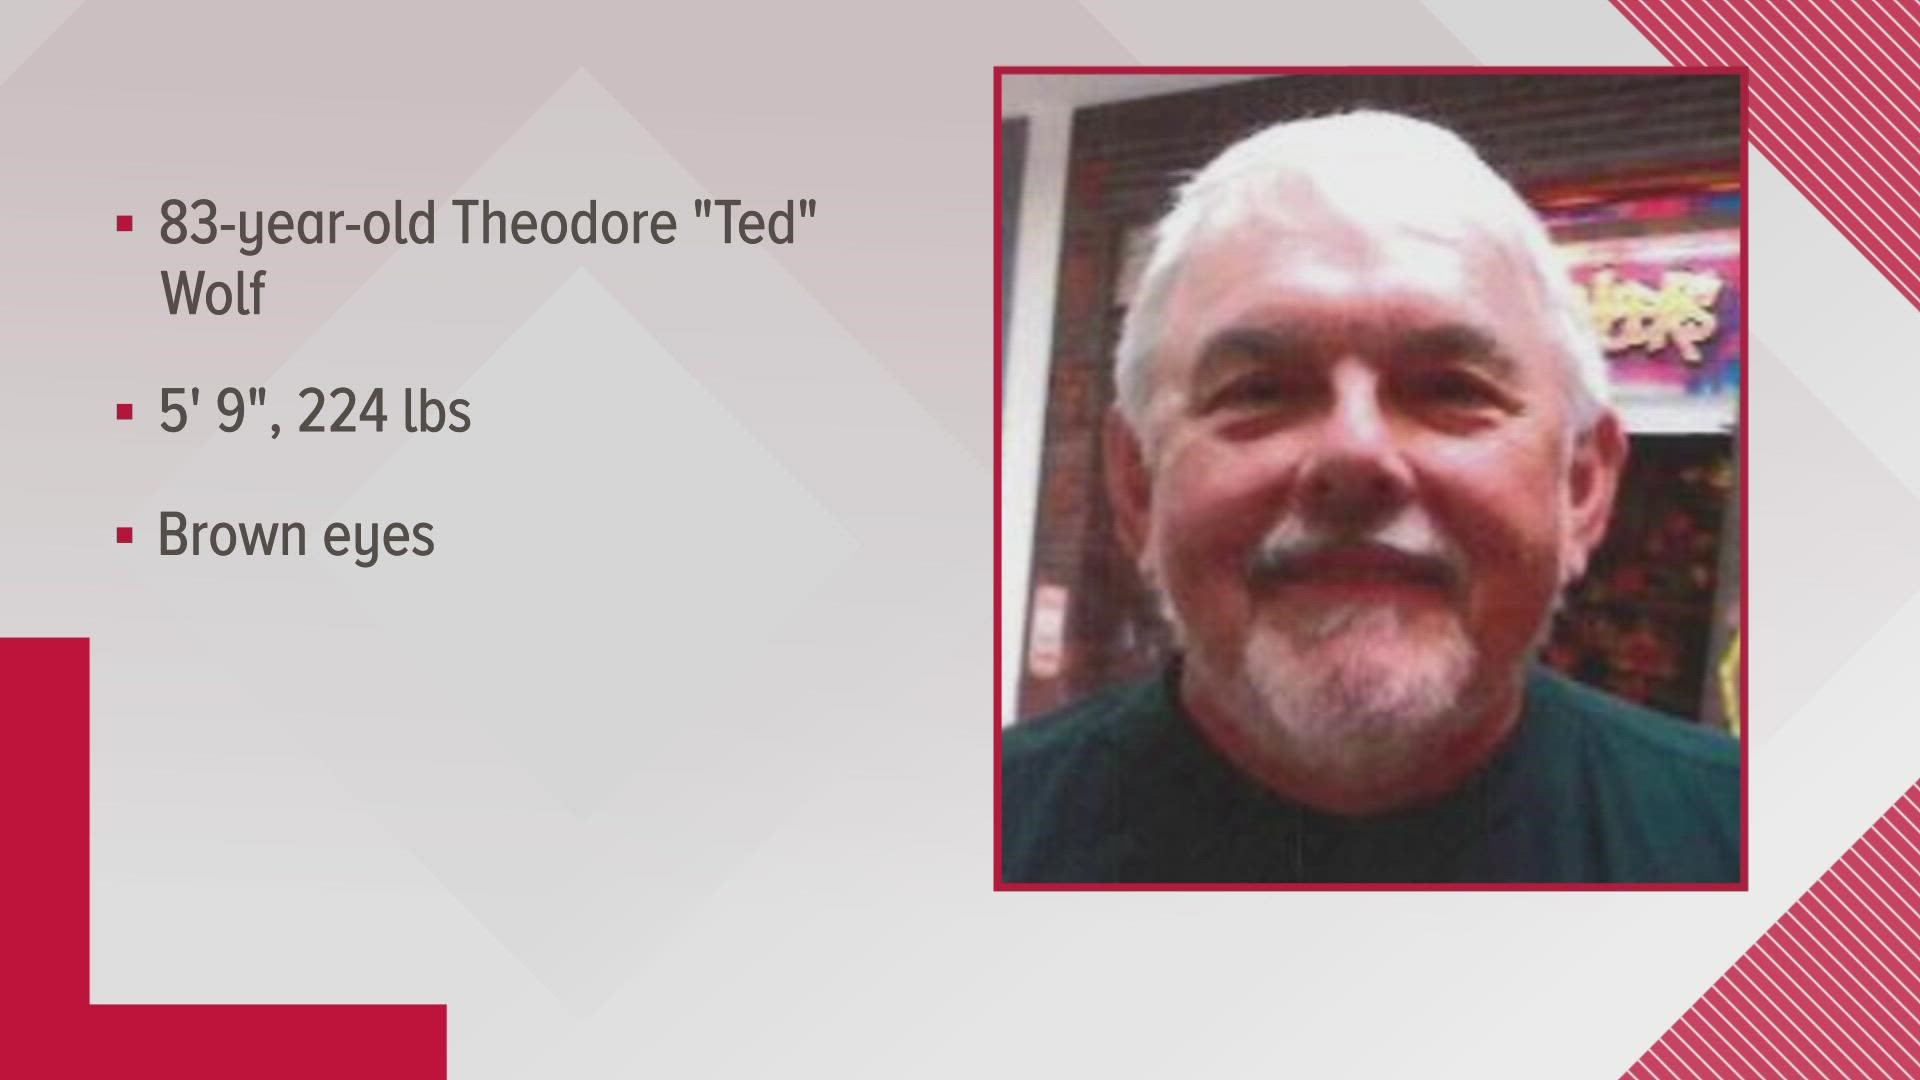 83-year-old Theodore "Ted" Wolf has been missing since Monday, Jan. 16 after he got into a small fender bender on the way to an appointment.